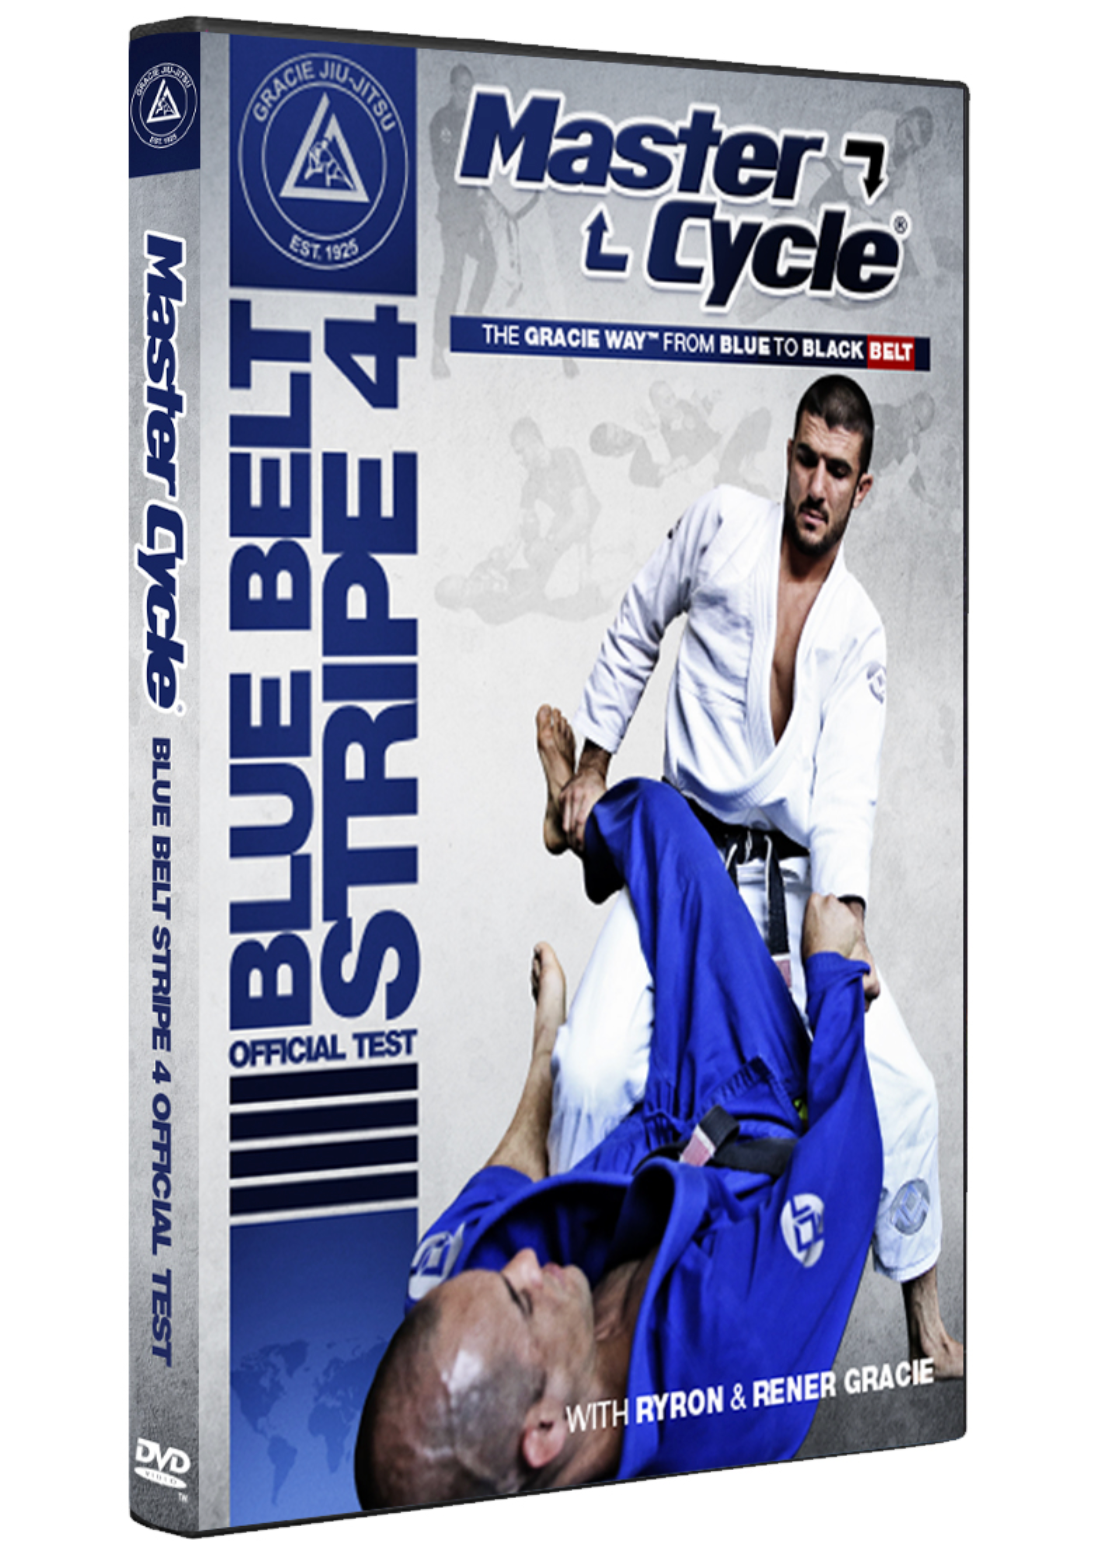 Gracie Academy Master Cycle: Blue Belt Stripe 4 DVD Official Test - Budovideos Inc